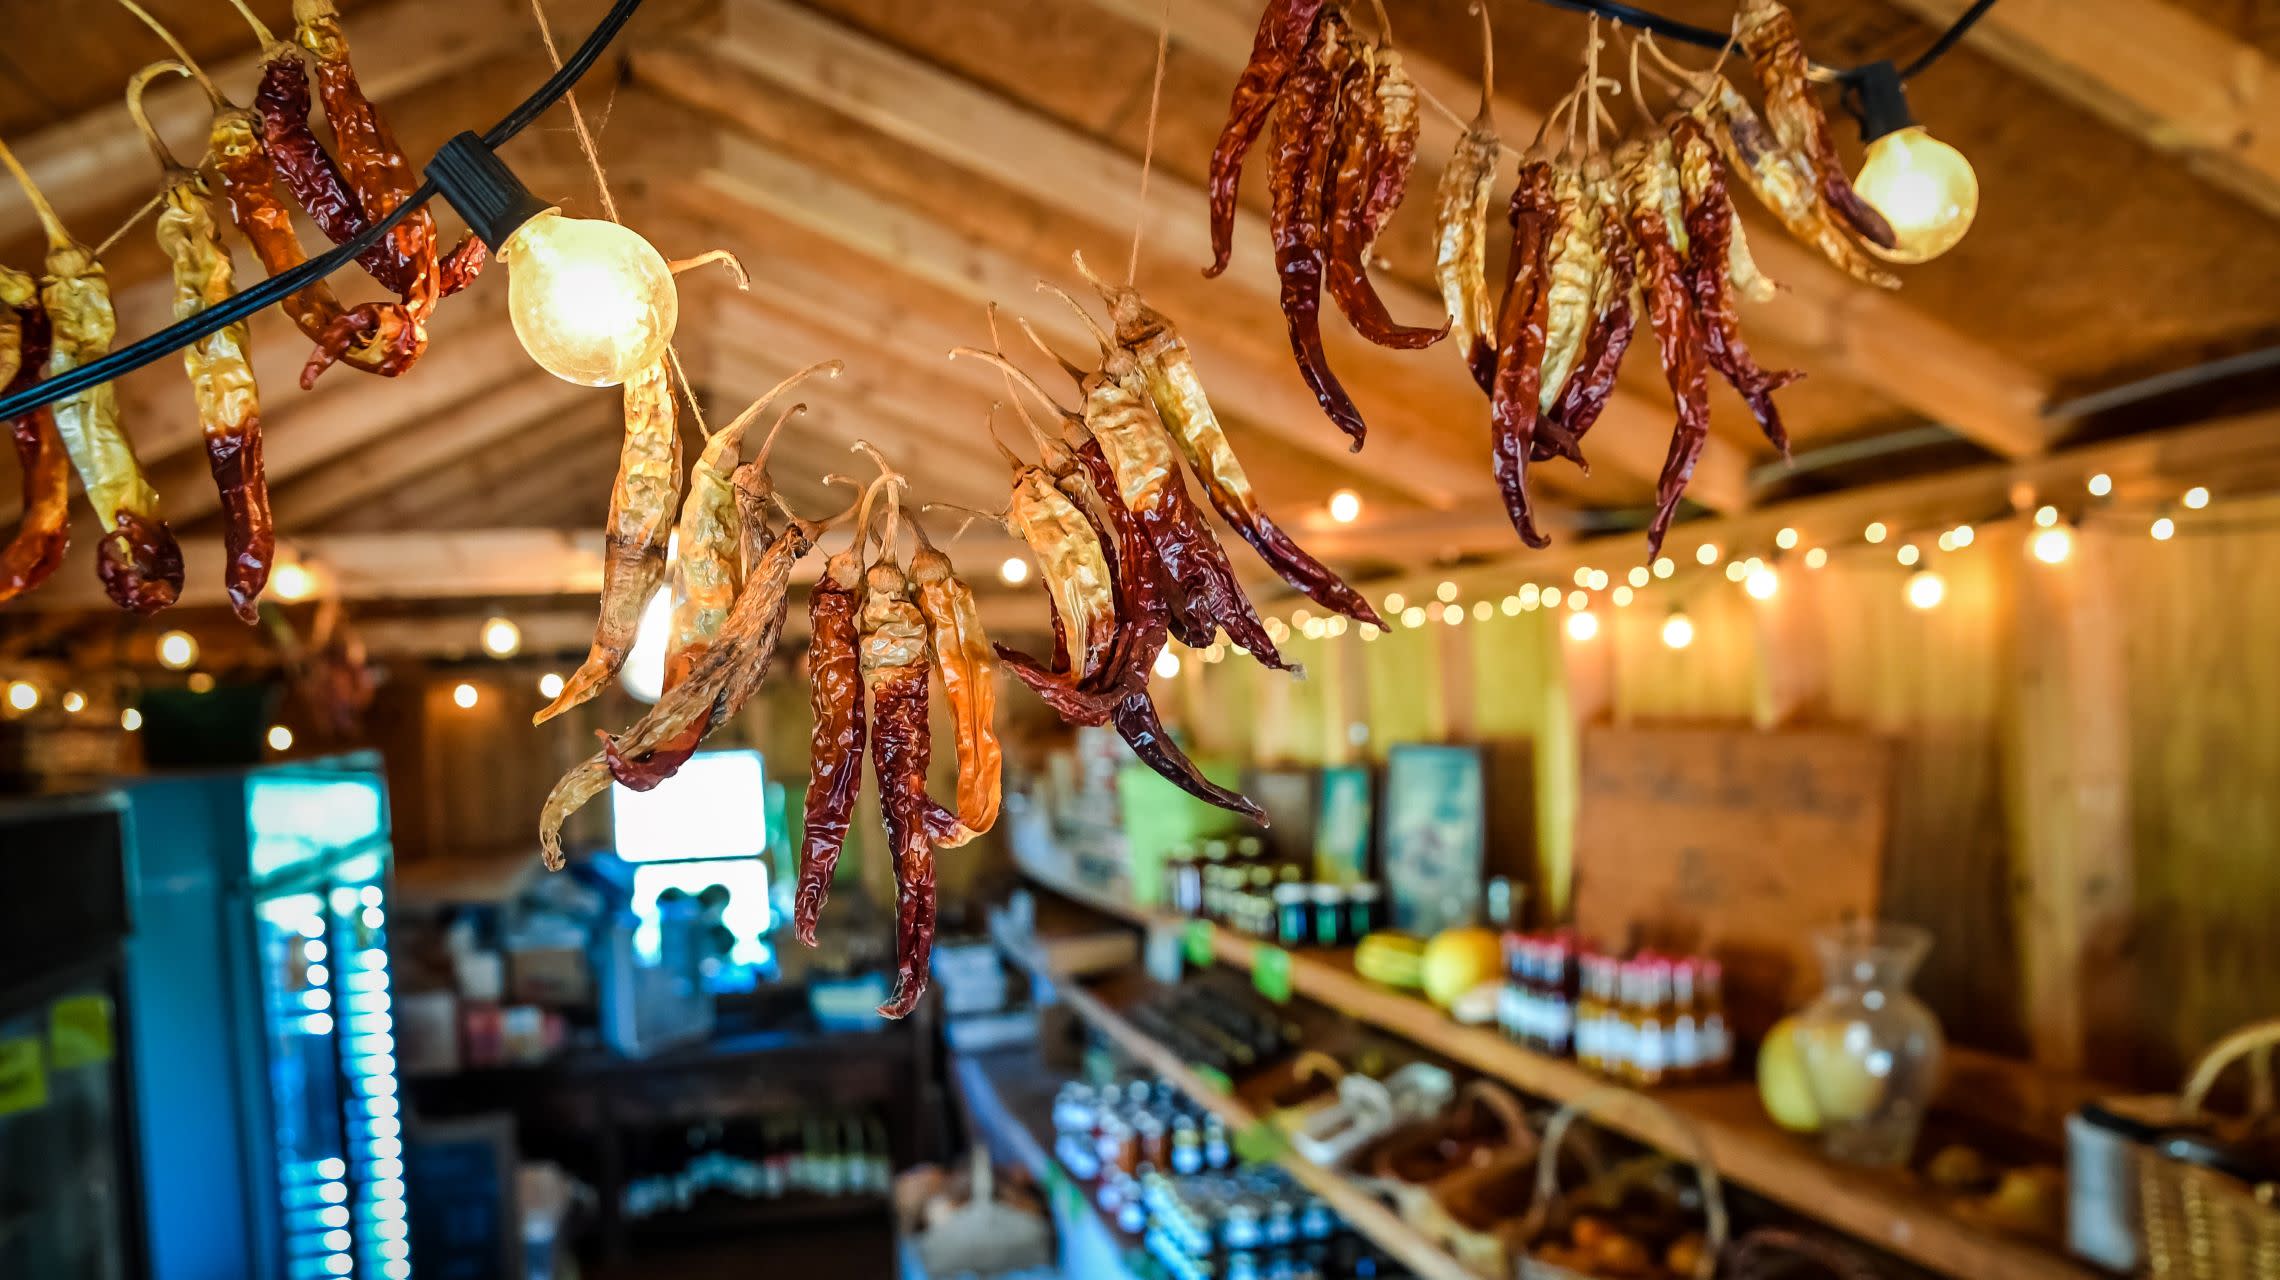 dried chilis and lights hanging in market store